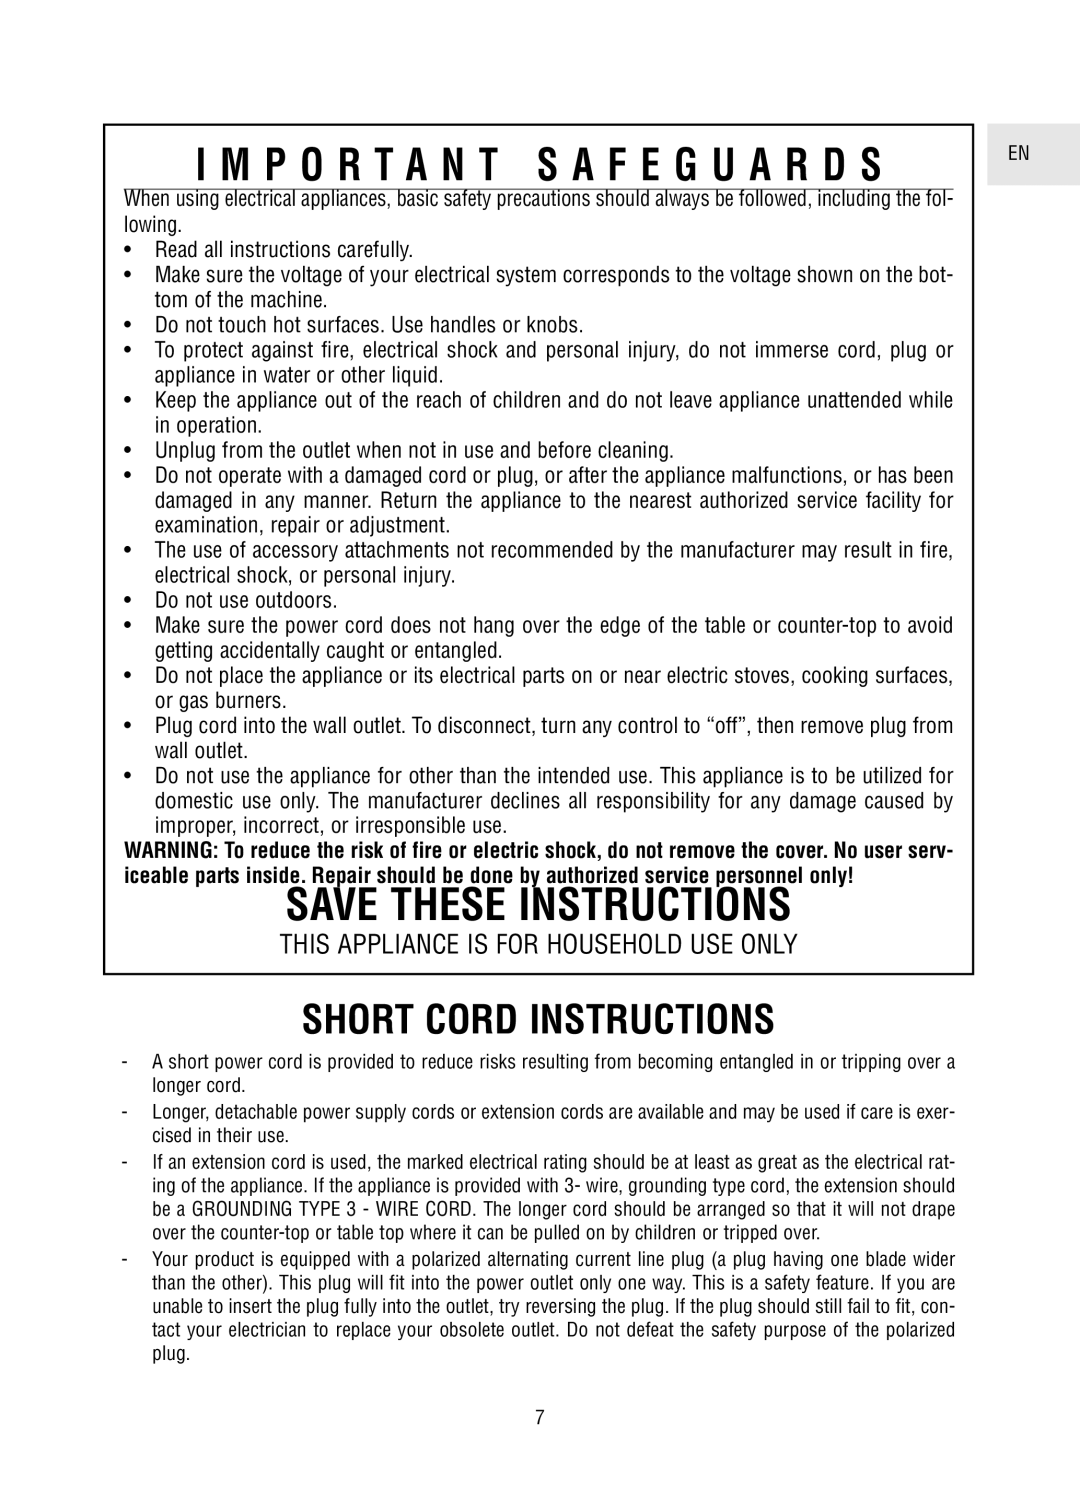 DeLonghi 5500 manual I M P O R T A N T S A F E G U A R D S, Save These Instructions, Short Cord Instructions 